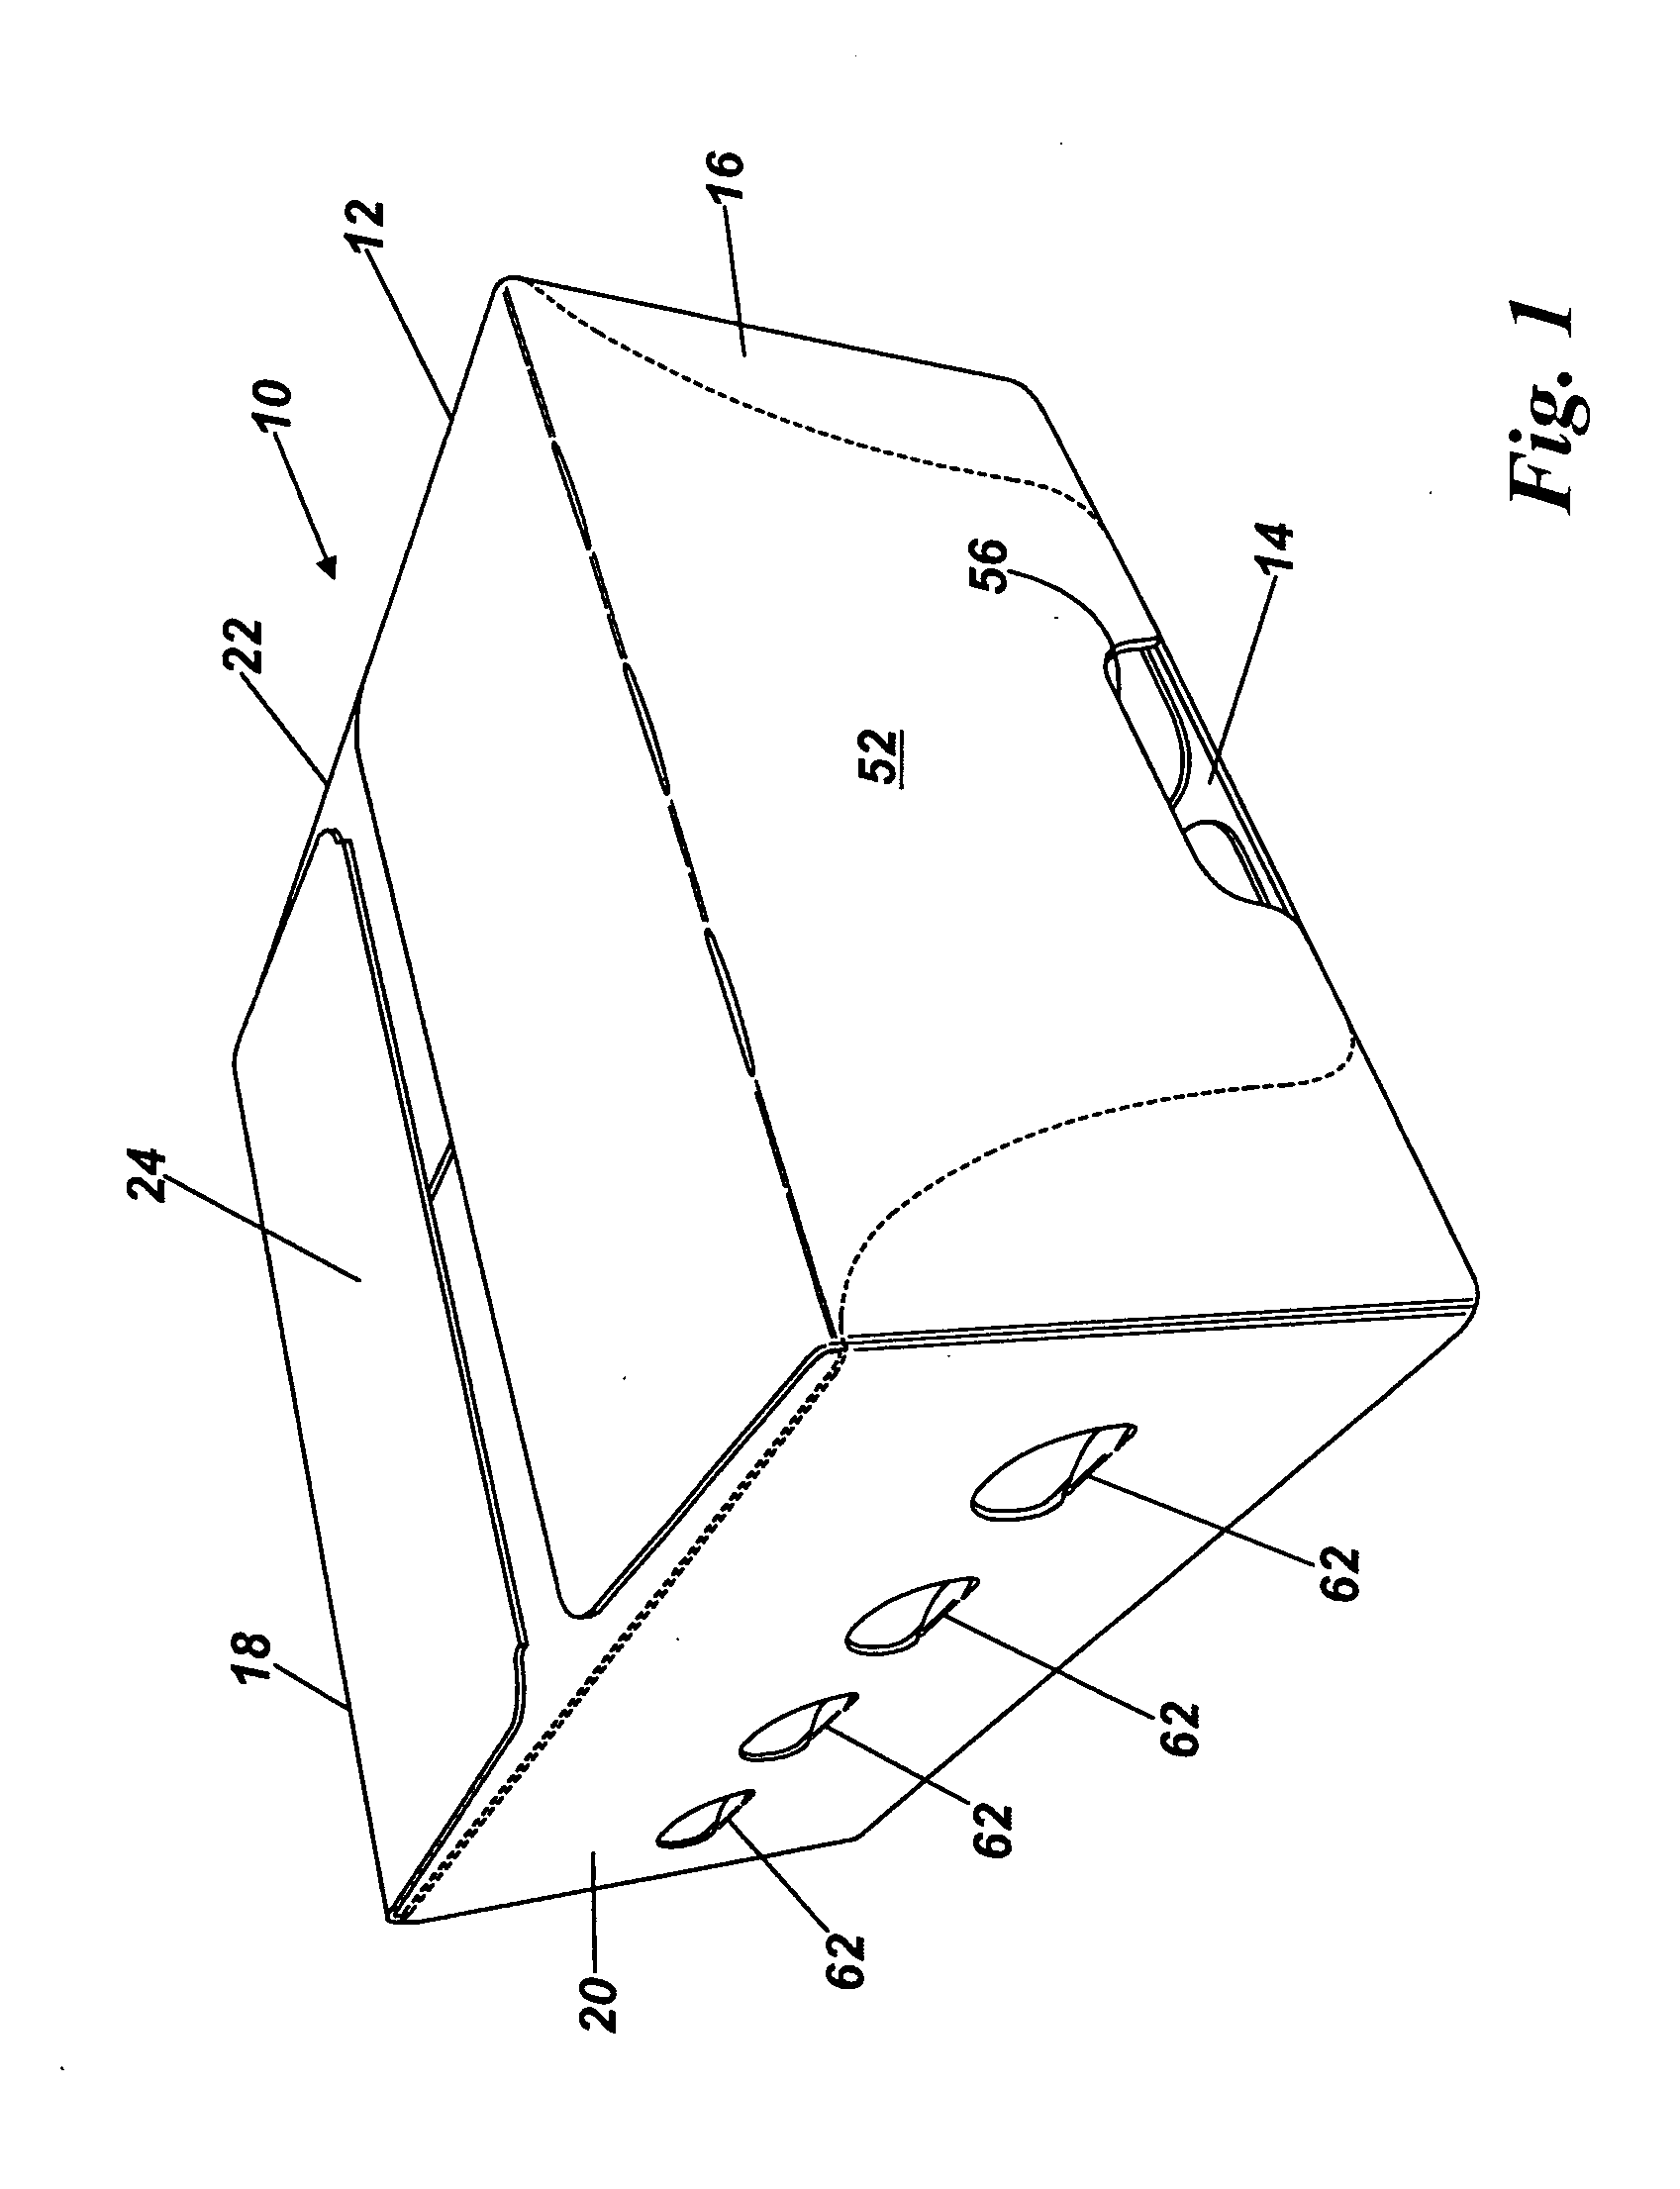 Packaging container, blank and method of forming a packaging container